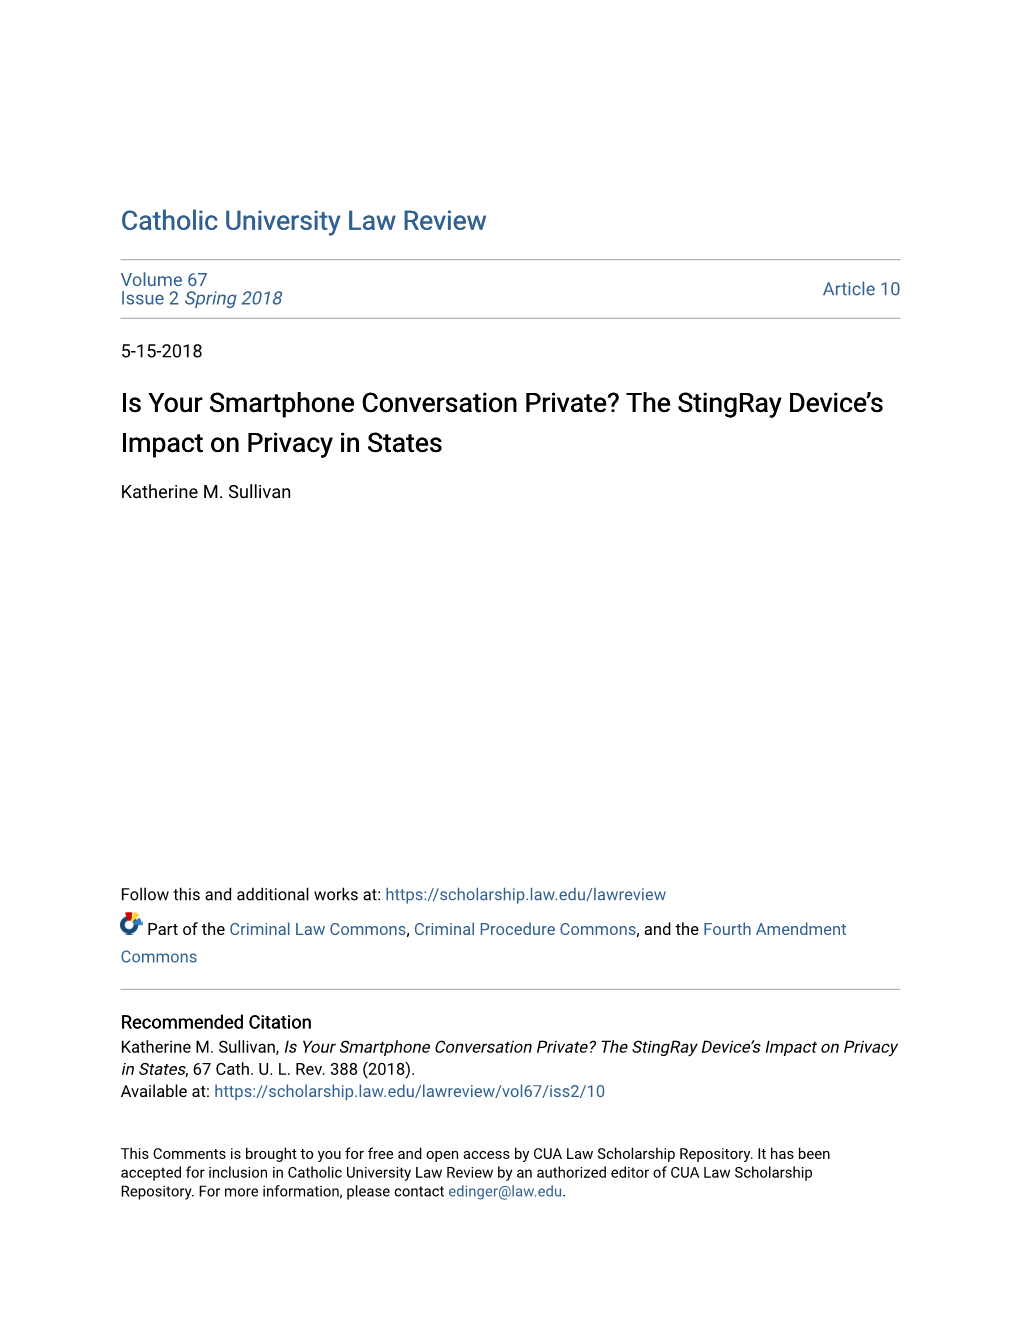 Is Your Smartphone Conversation Private? the Stingray Device's